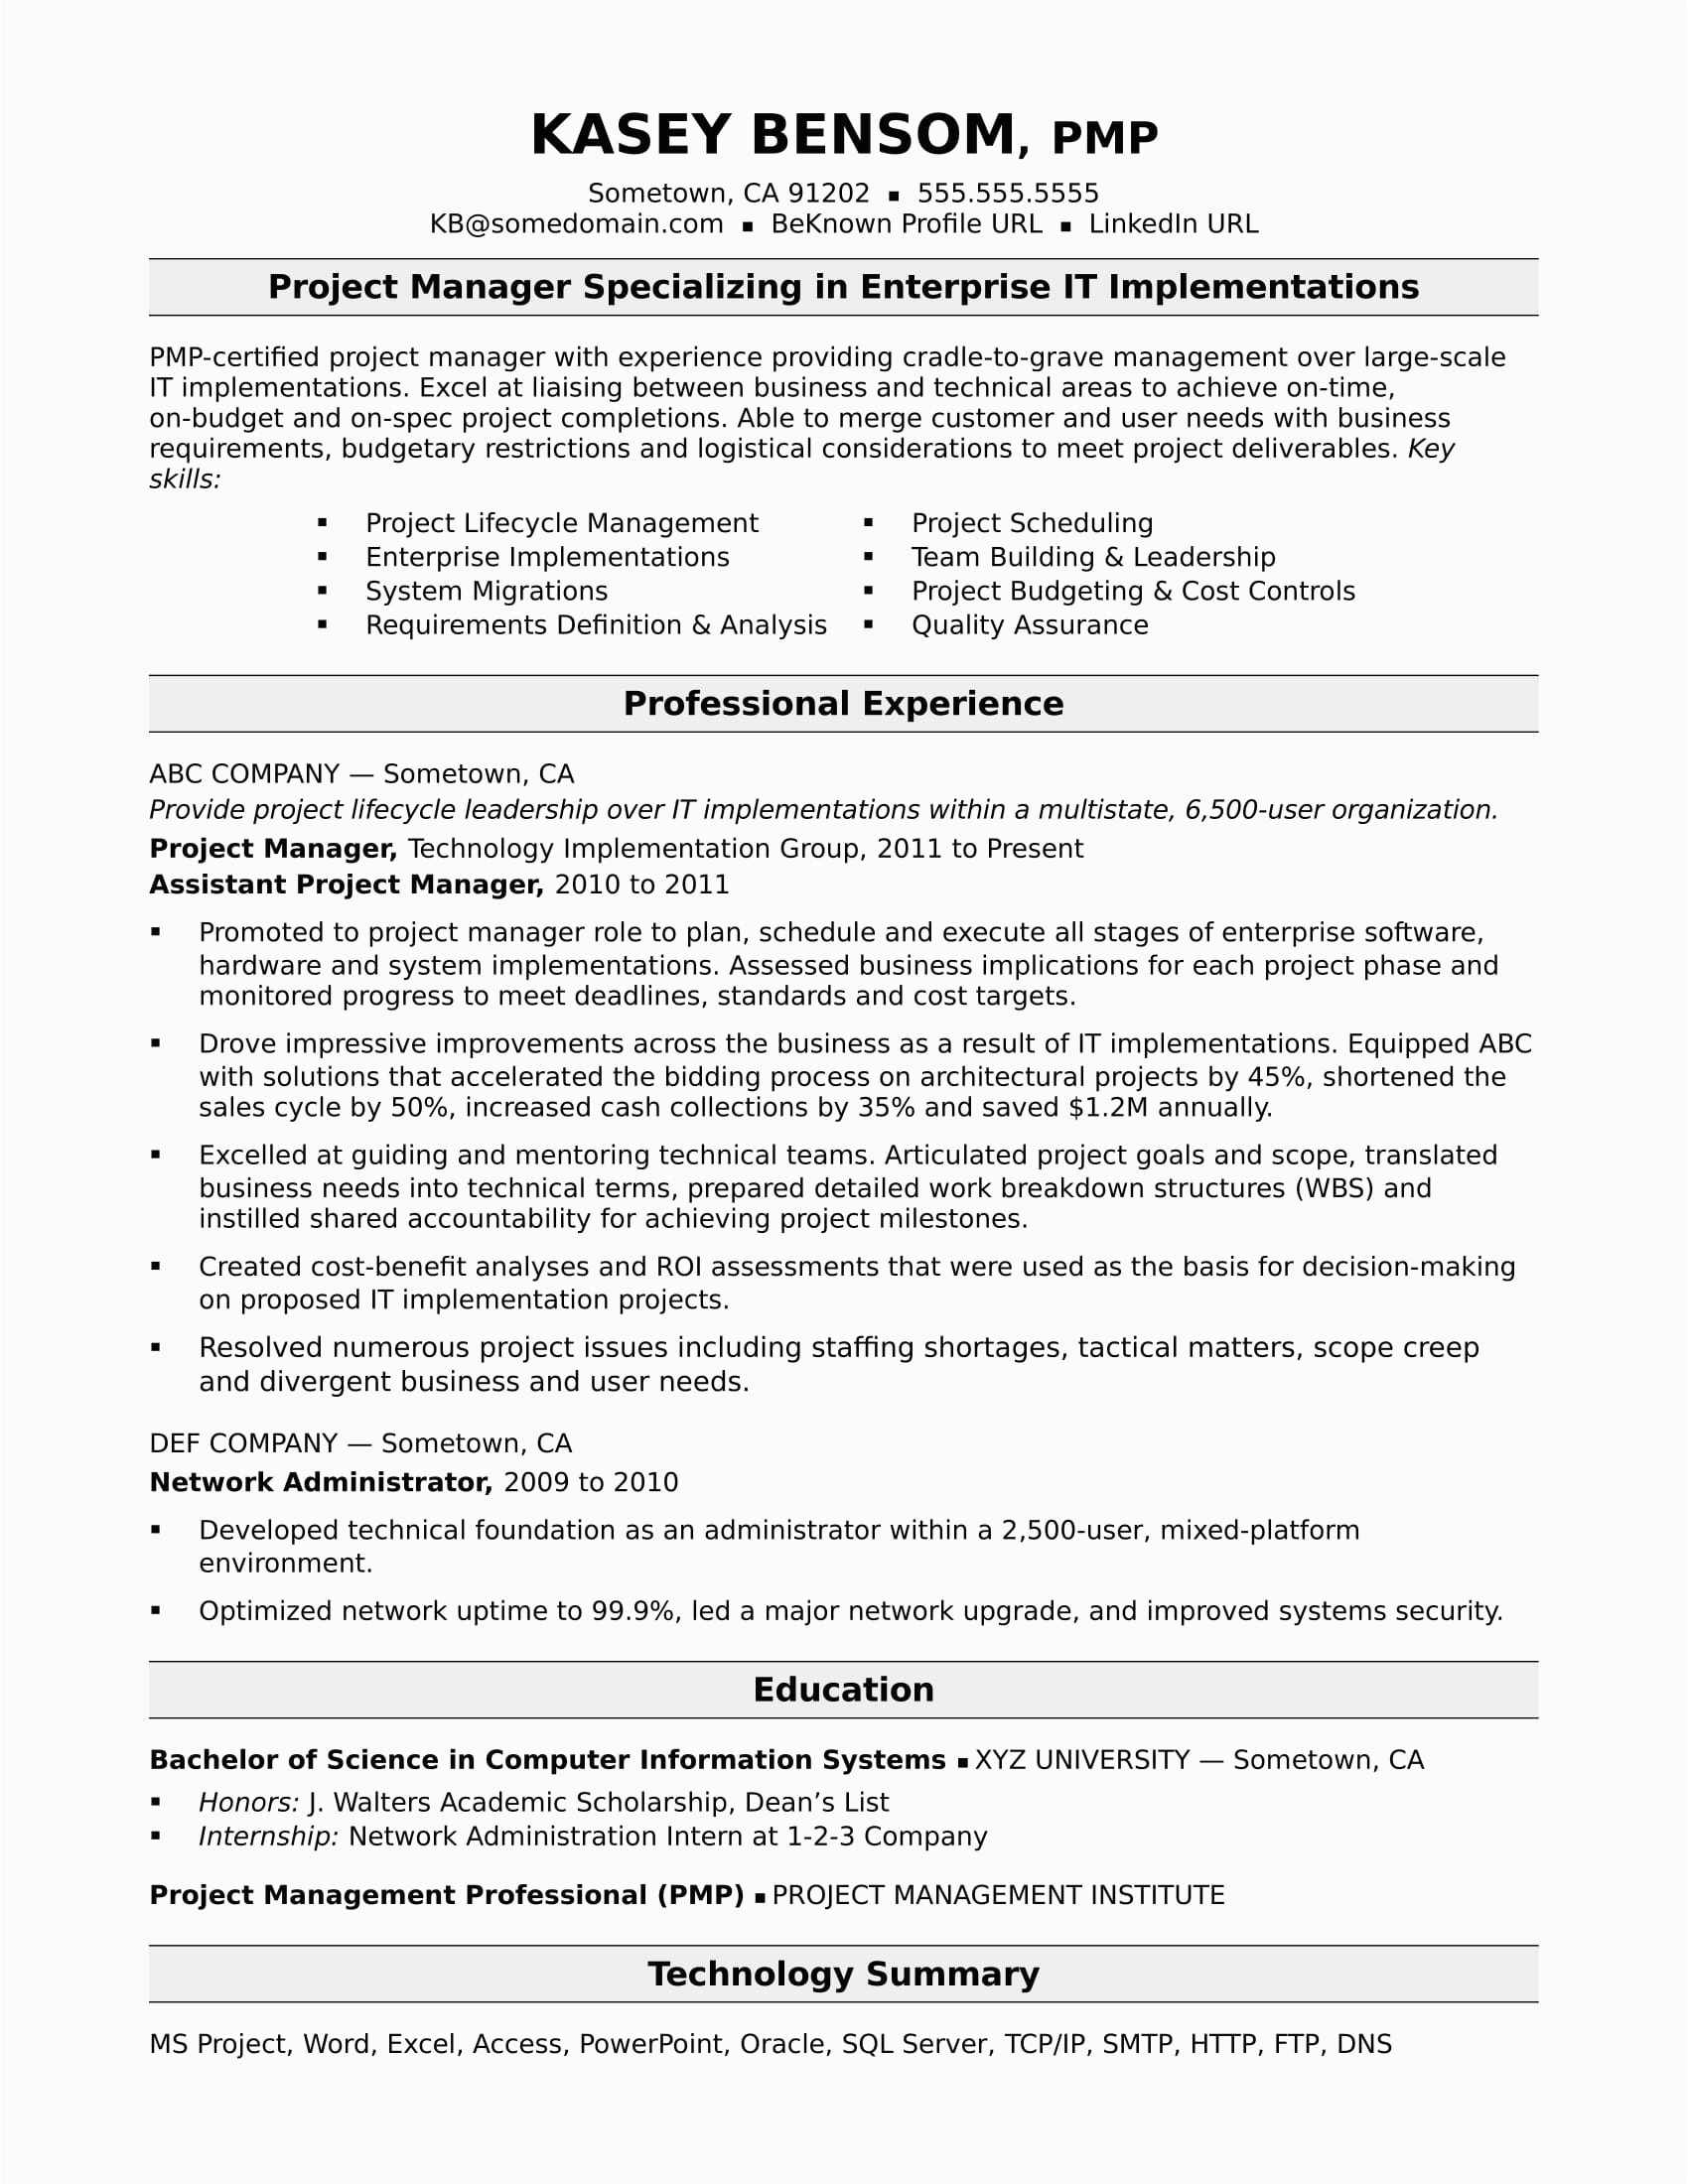 Sample Professional Resume It Manager Position Sample Resume for A Midlevel It Project Manager